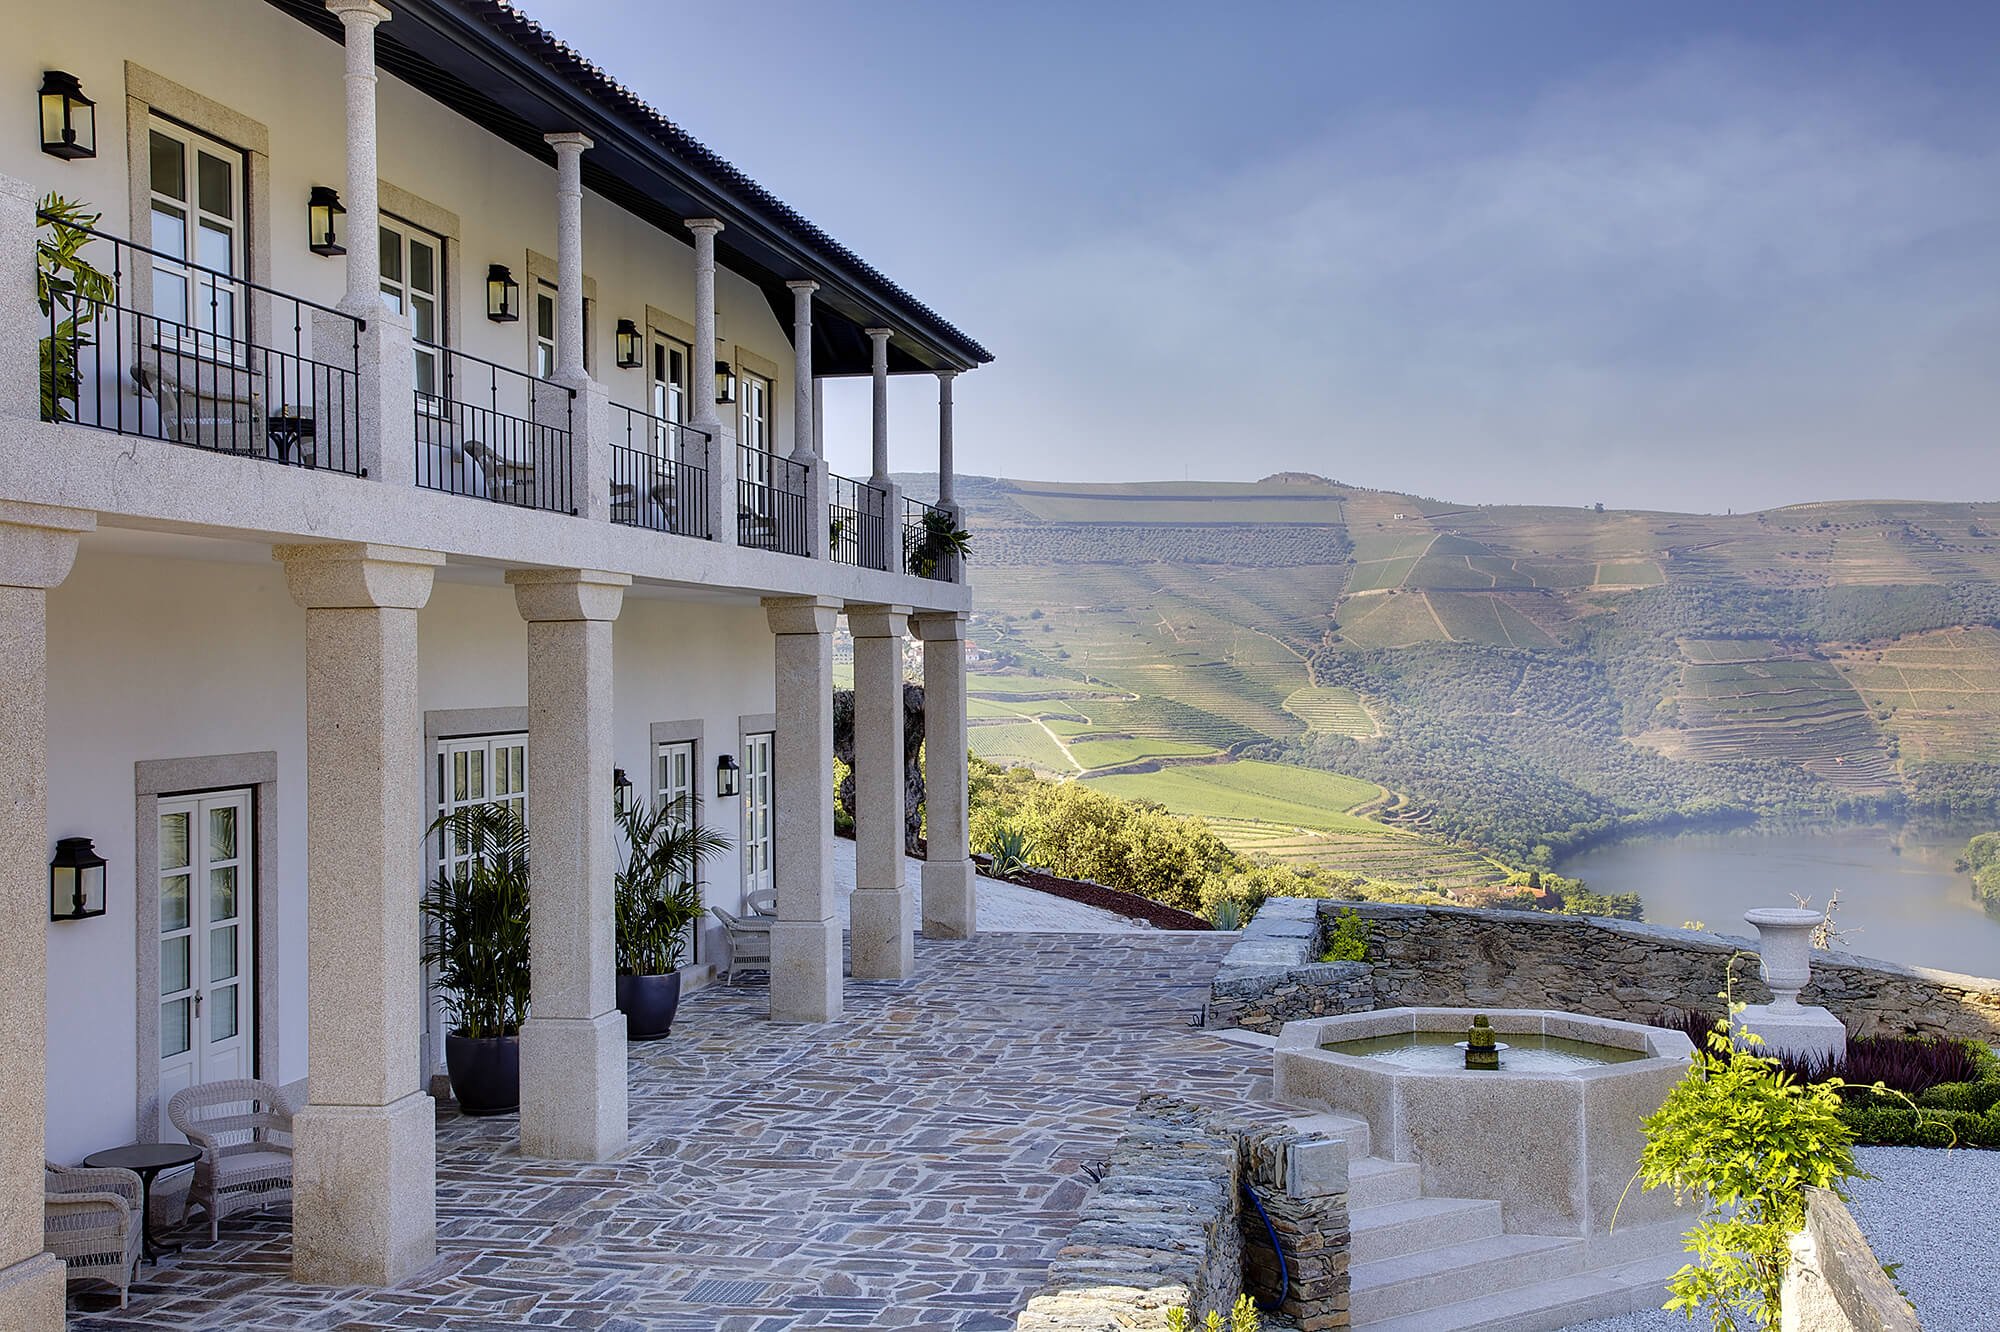 Prestigious villa with panoramic view of the Douro Valley in Portugal